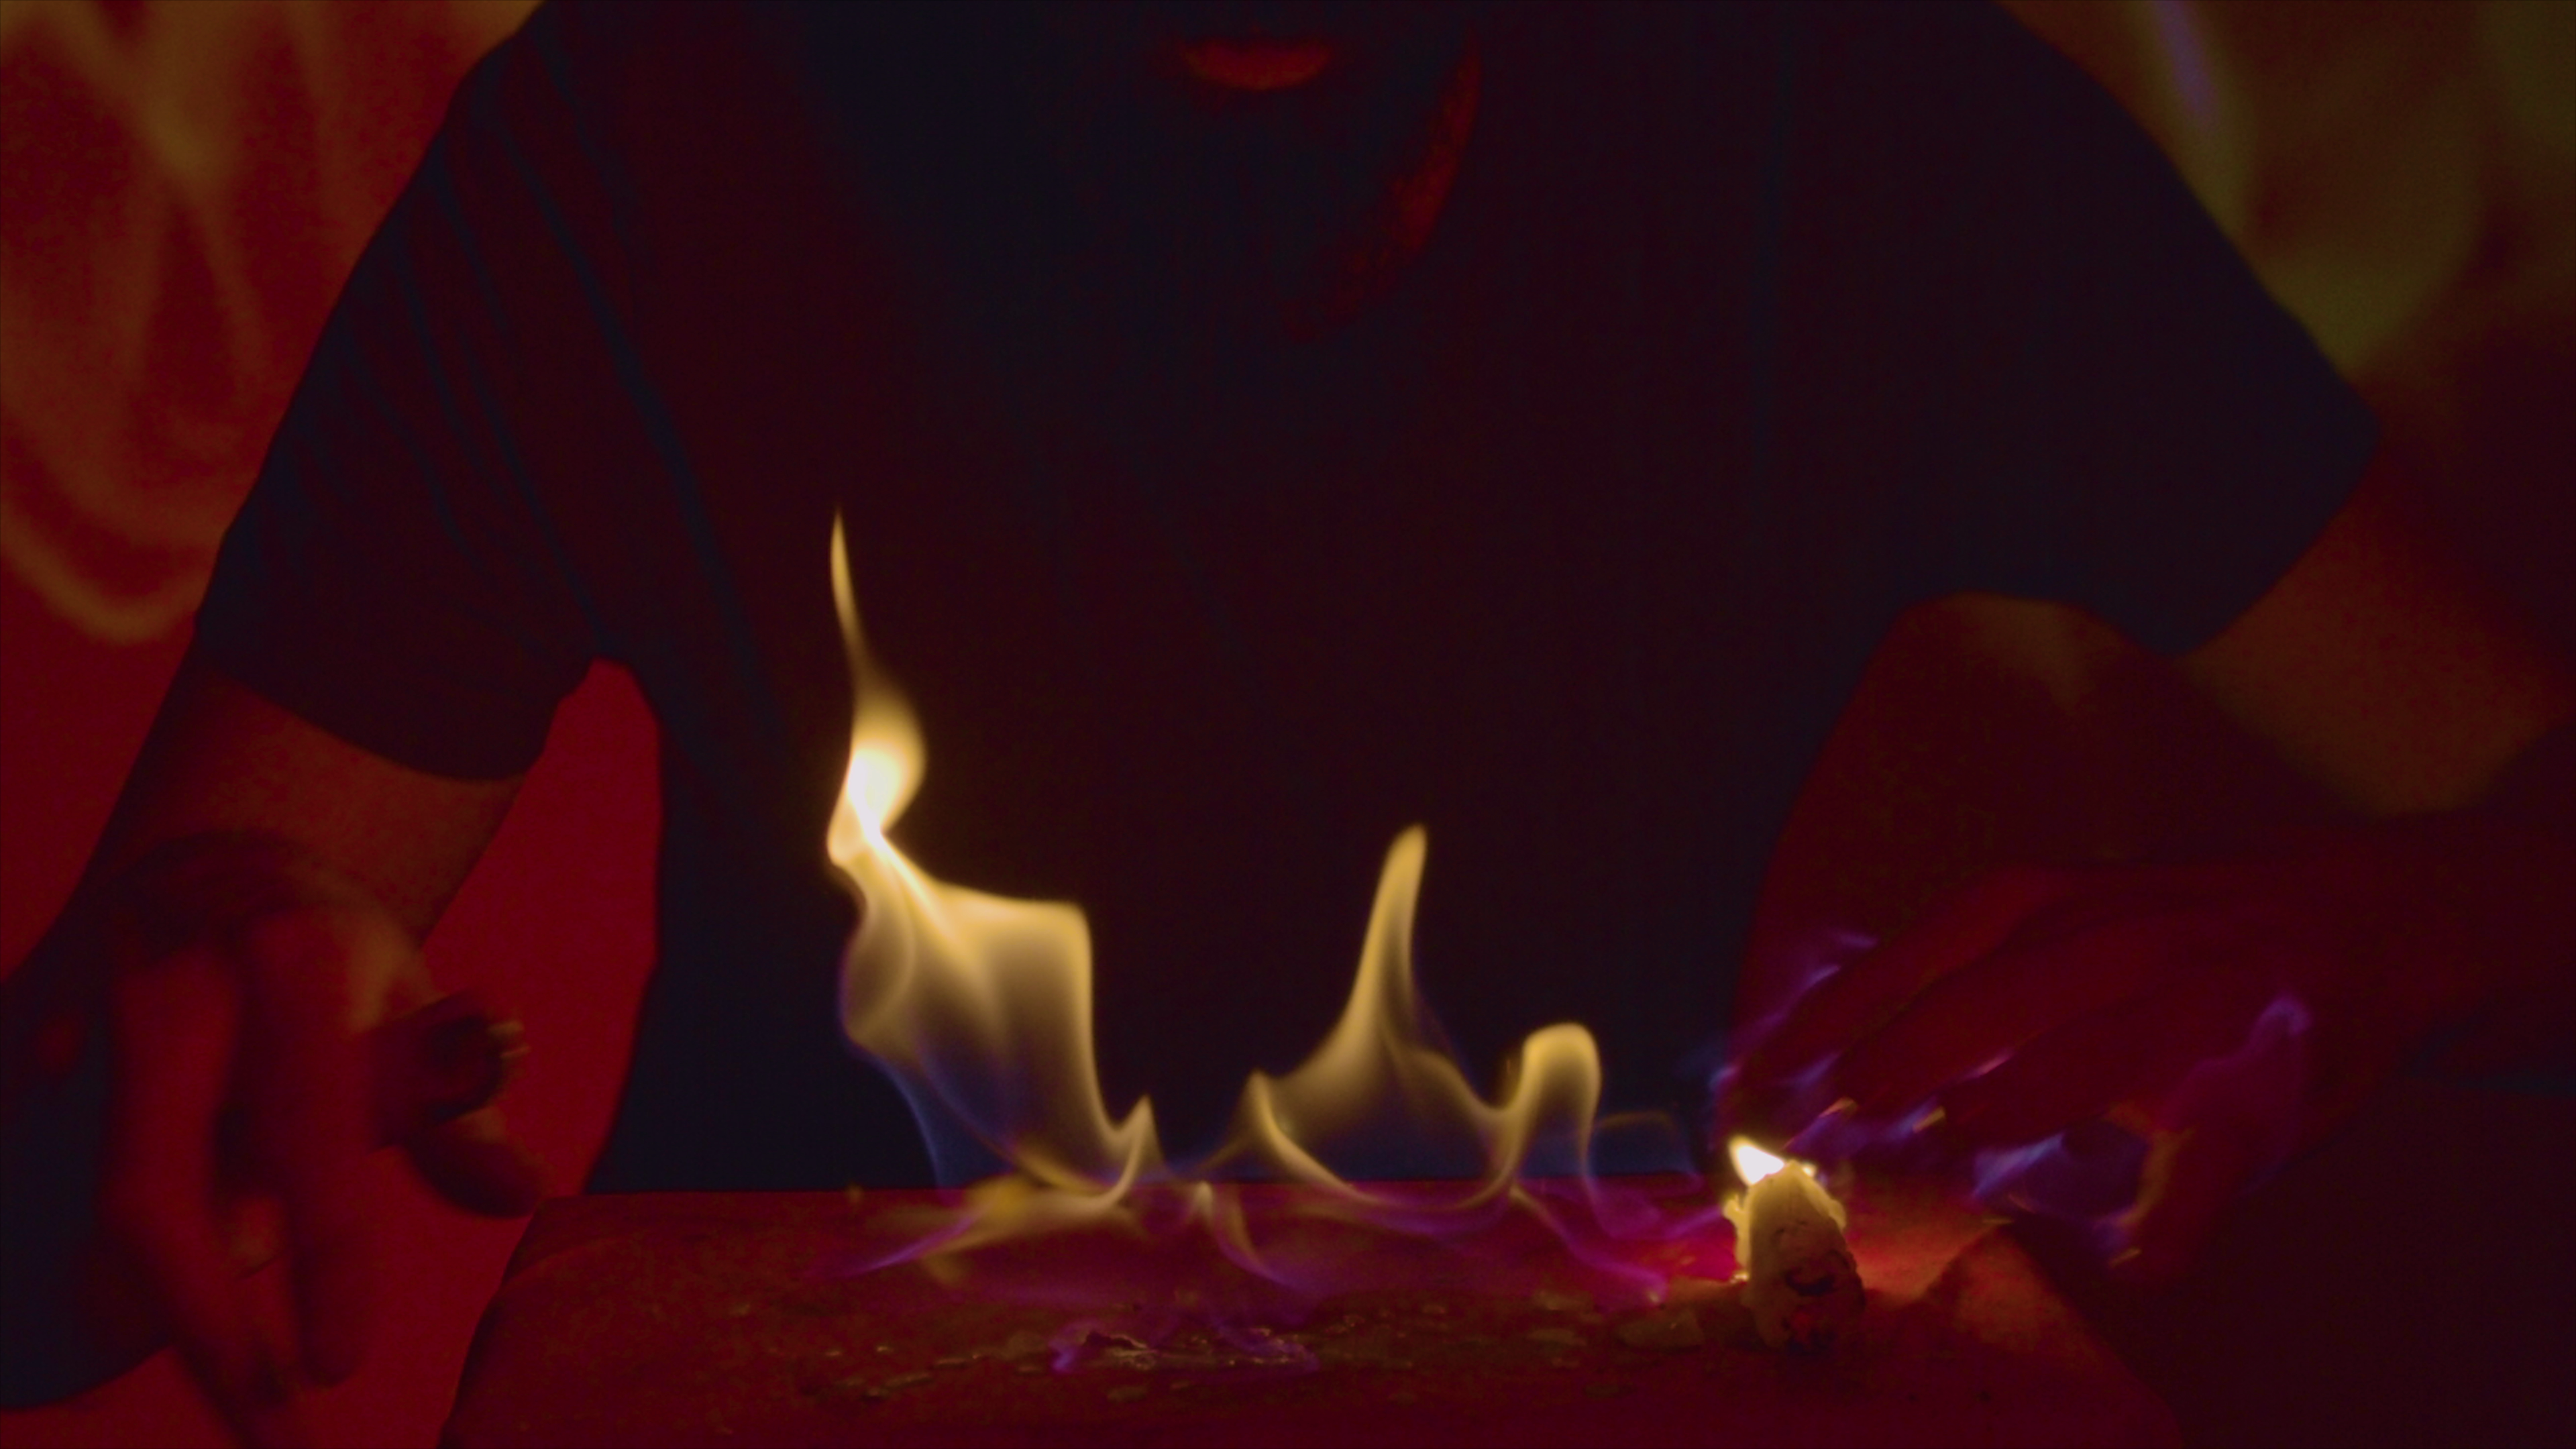 Still from "Pyromania" directed by Michael J. Epstein. Cinematography by Sophia Cacciola.